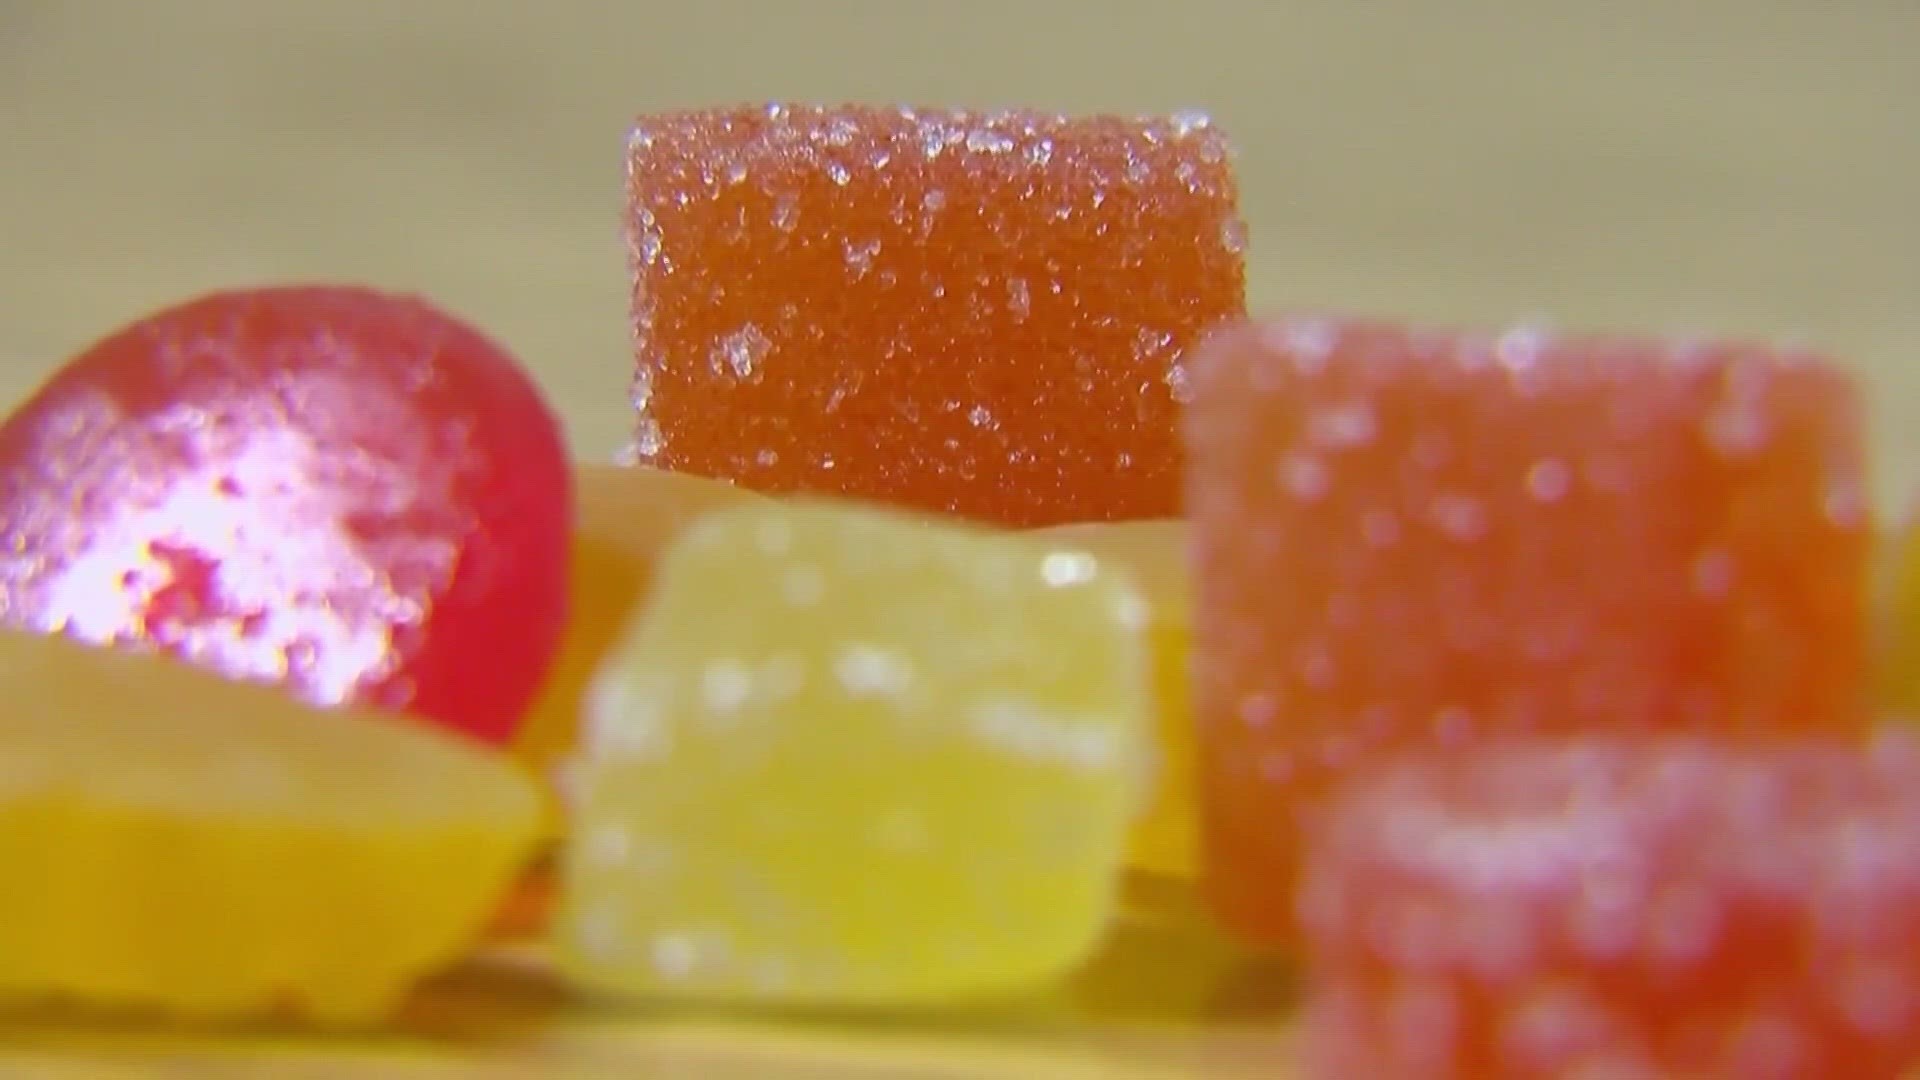 Last Friday, two Columbus City School middle school students became ill after eating marijuana-infused gummies.